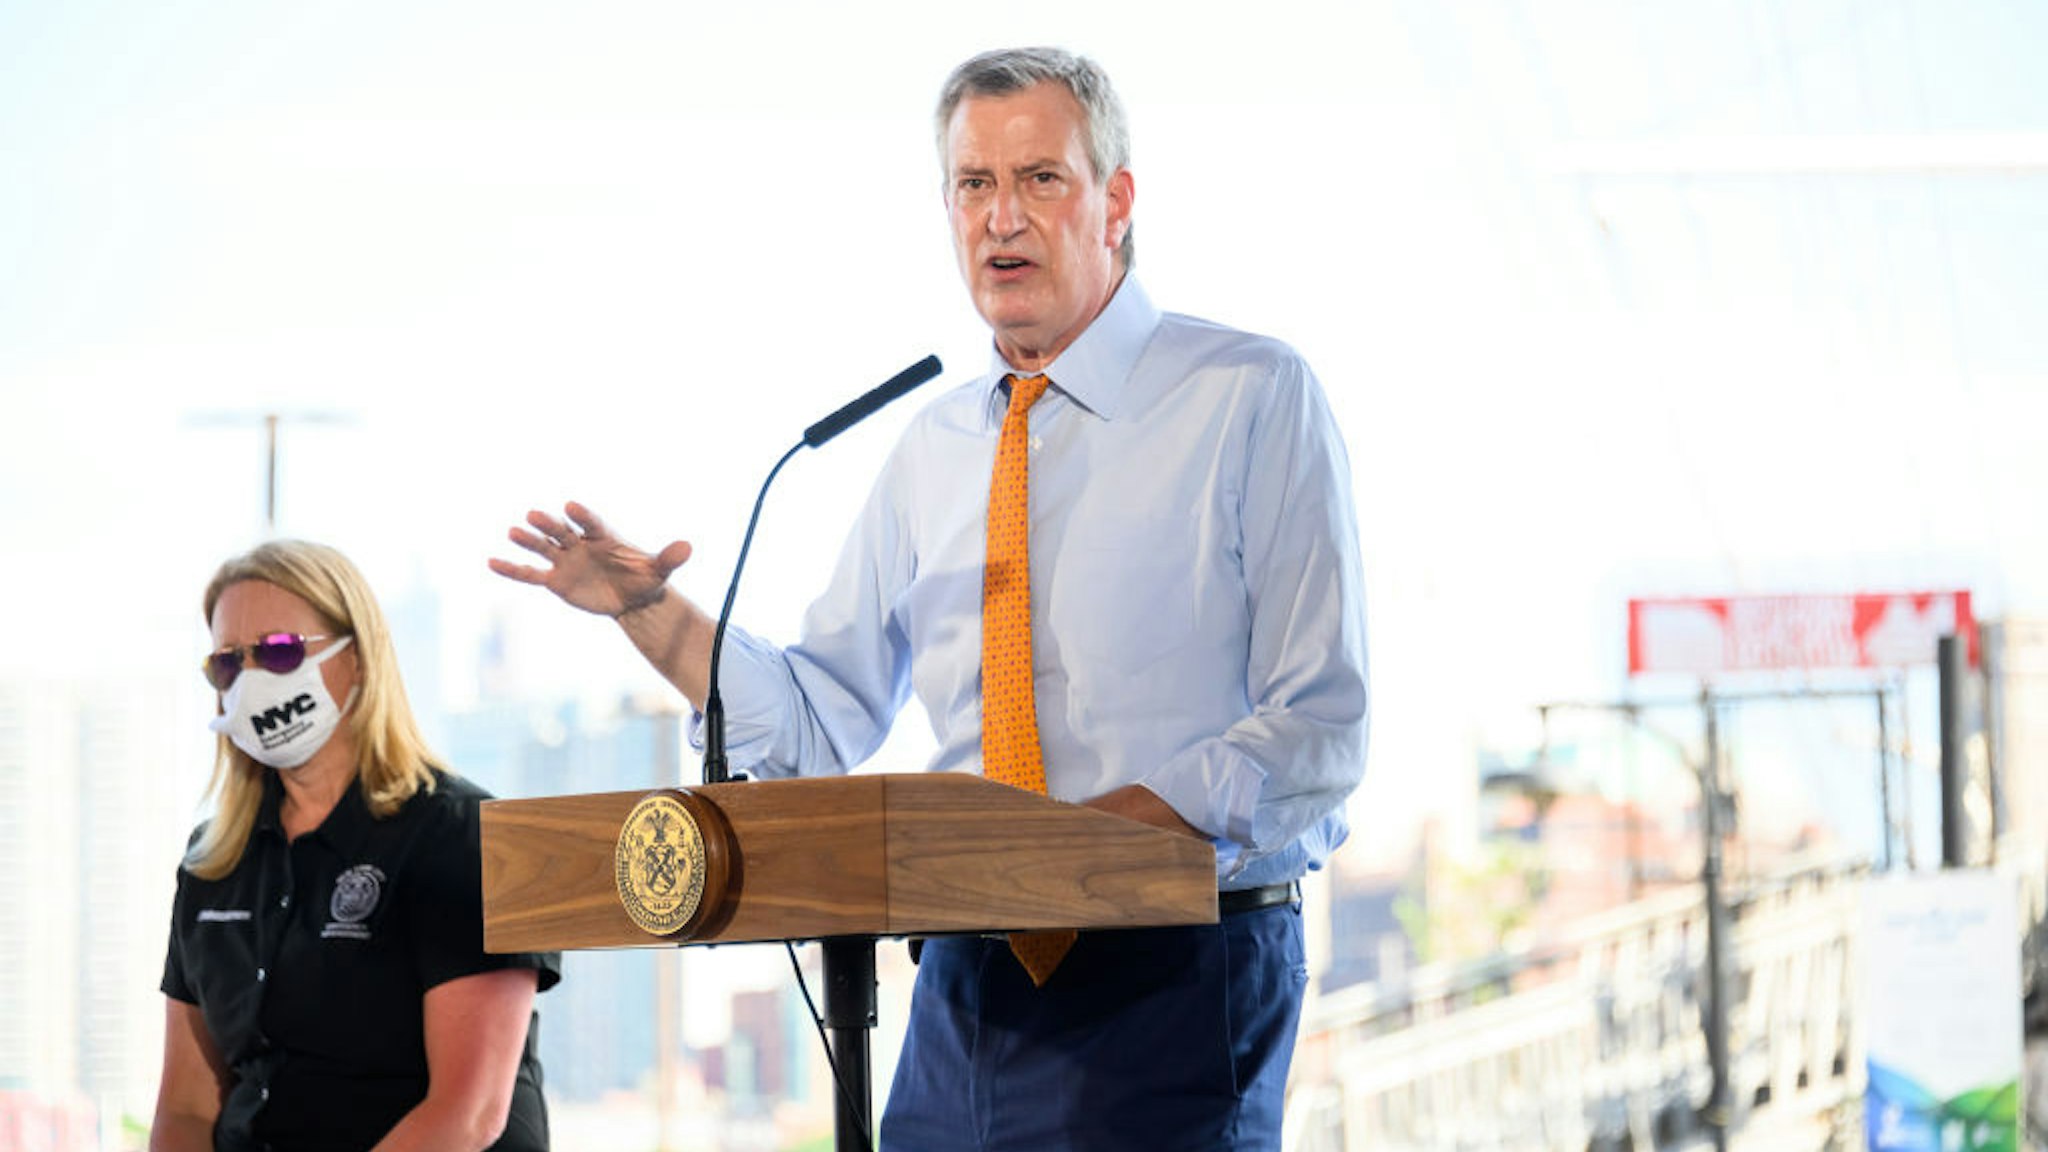 NEW YORK, NEW YORK - AUGUST 03: New York City Mayor Bill de Blasio speaks at South Street Seaport as workers erect temporary flood barriers in preparation for potential flooding and a storm surge from Tropical Storm Isaias on August 03, 2020 in New York City. The storm, which is heading up the East Coast packing heavy winds, is expected to dump several inches of rain on the metro area starting late this evening and into tomorrow. The interlocking tubes, called Tiger Dams, are installed in areas that were heavily damaged from flooding during Hurricane Sandy. (Photo by Noam Galai/Getty Images)